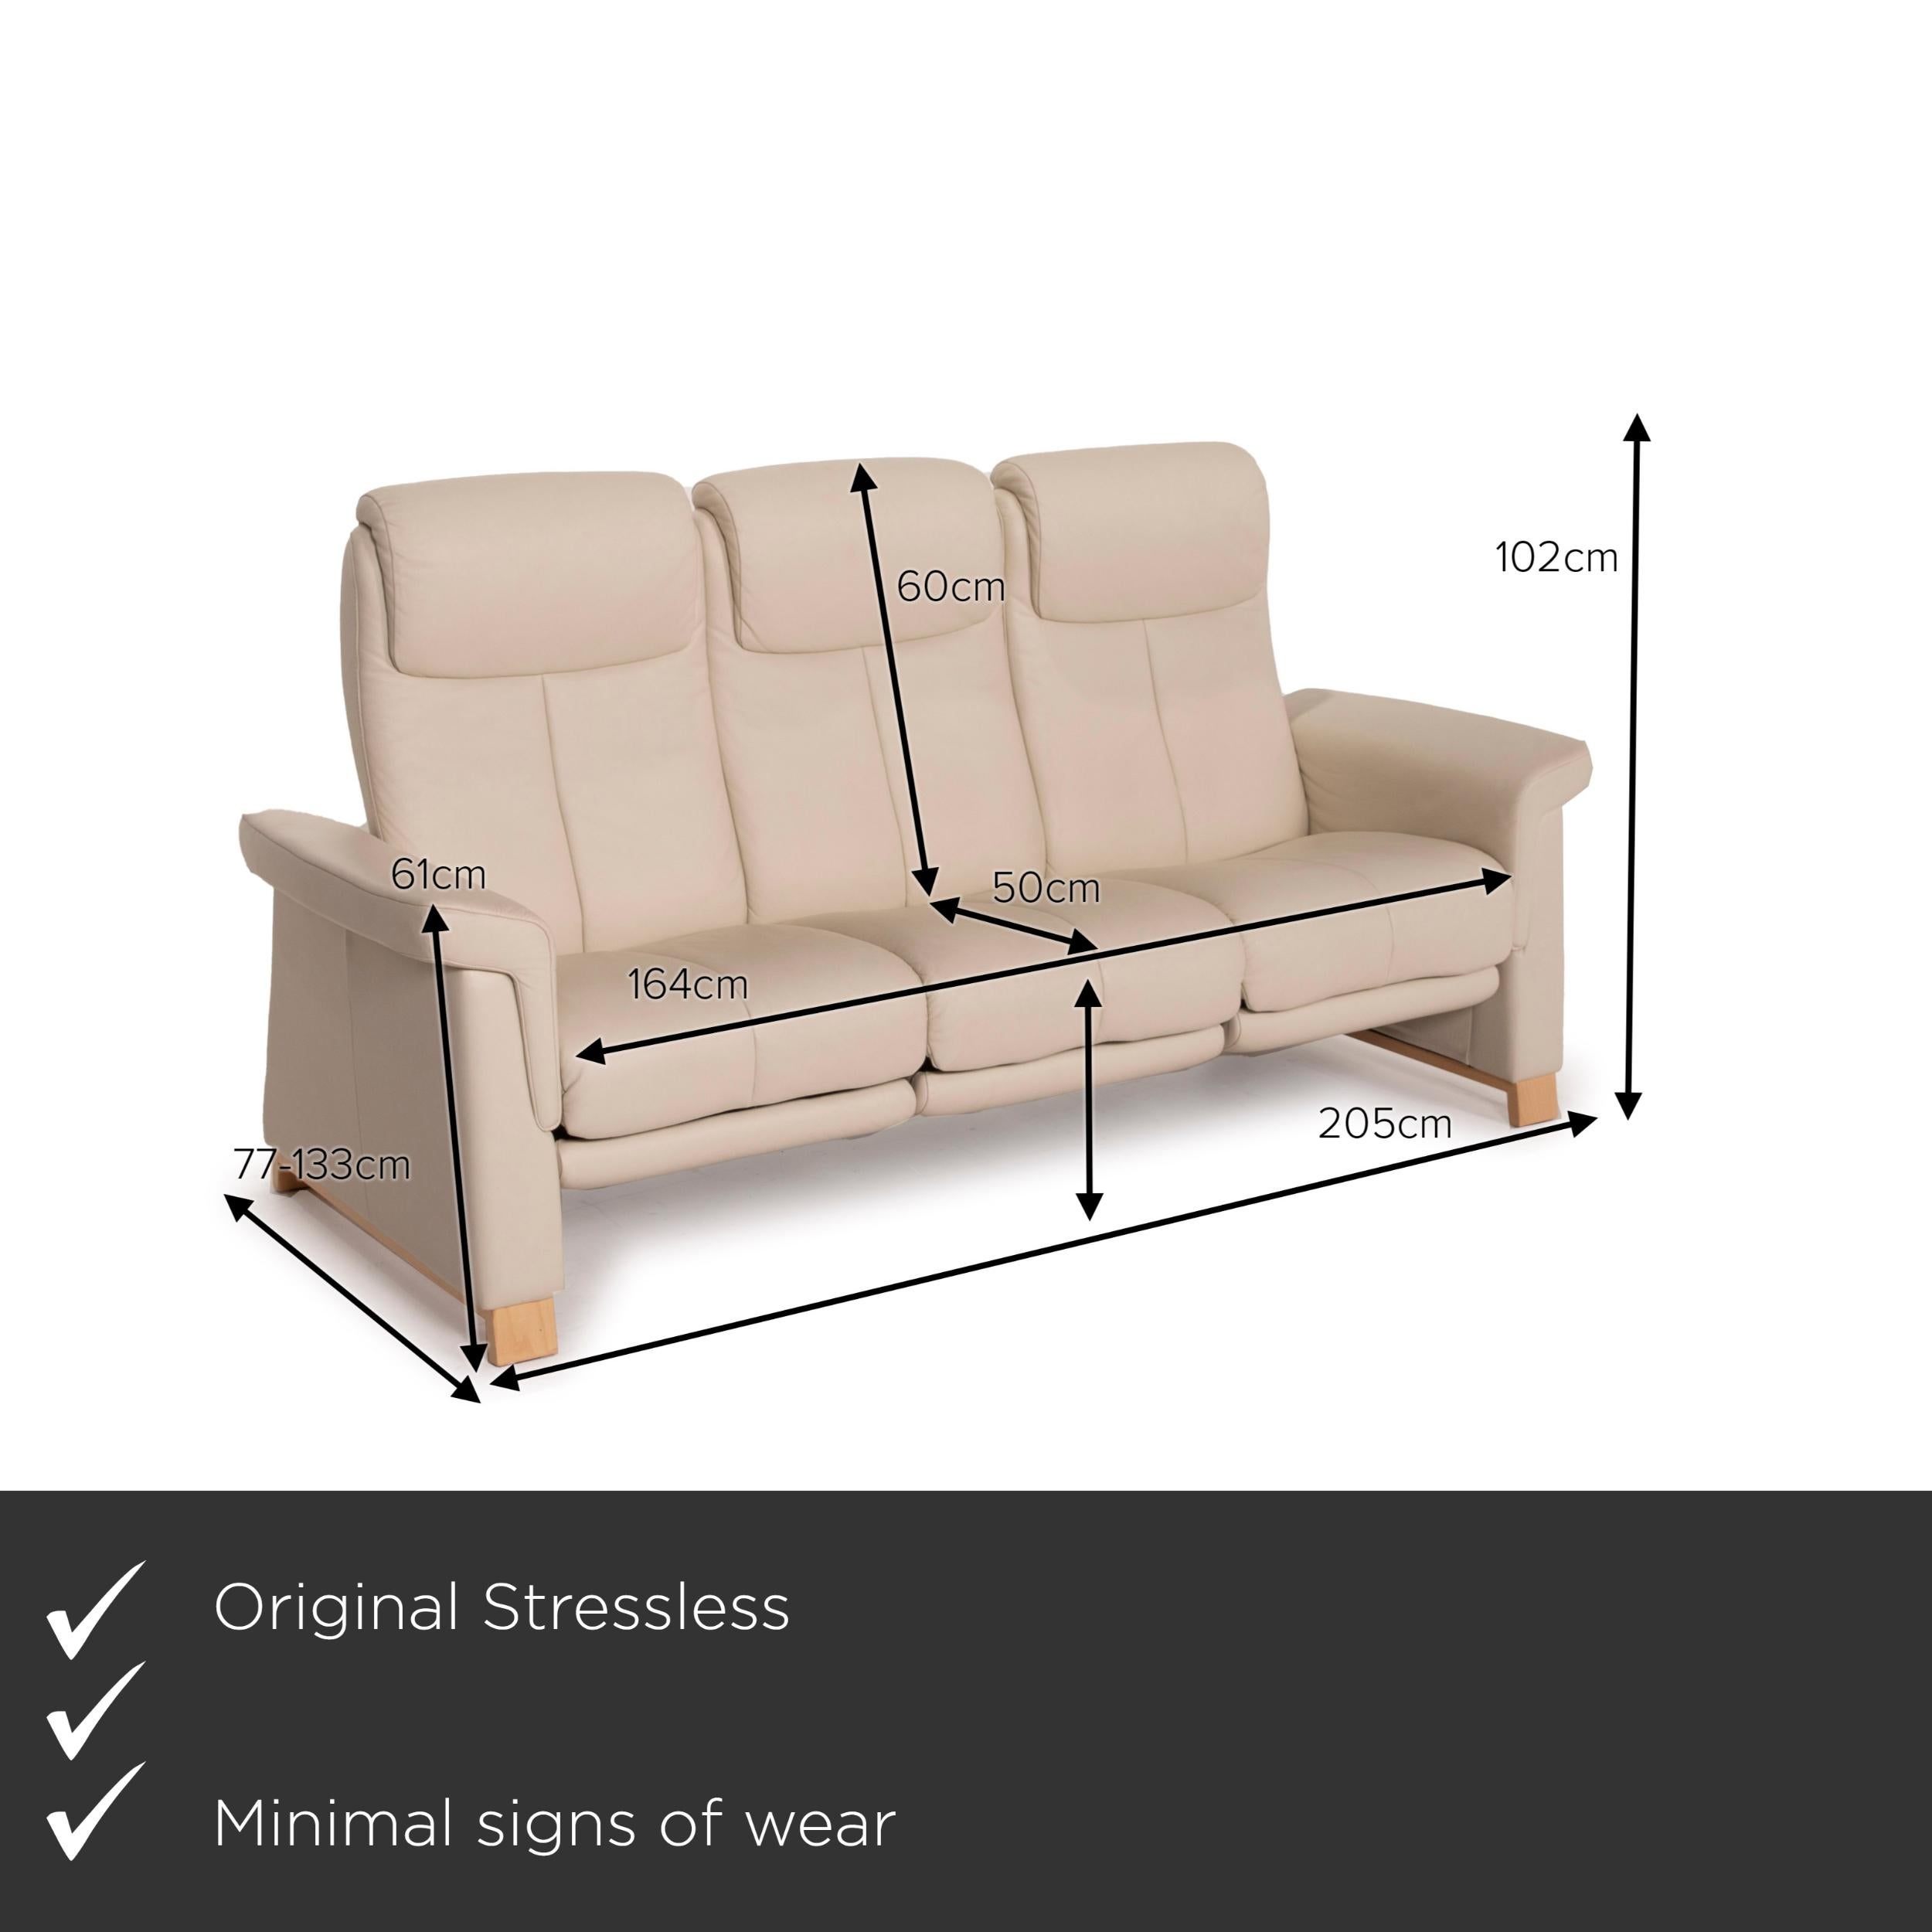 We present to you a Stressless leather sofa beige three-seater electric function relaxation function.
 

 Product measurements in centimeters:
 

Depth: 77
Width: 205
Height: 102
Seat height: 45
Rest height: 61
Seat depth: 50
Seat width: